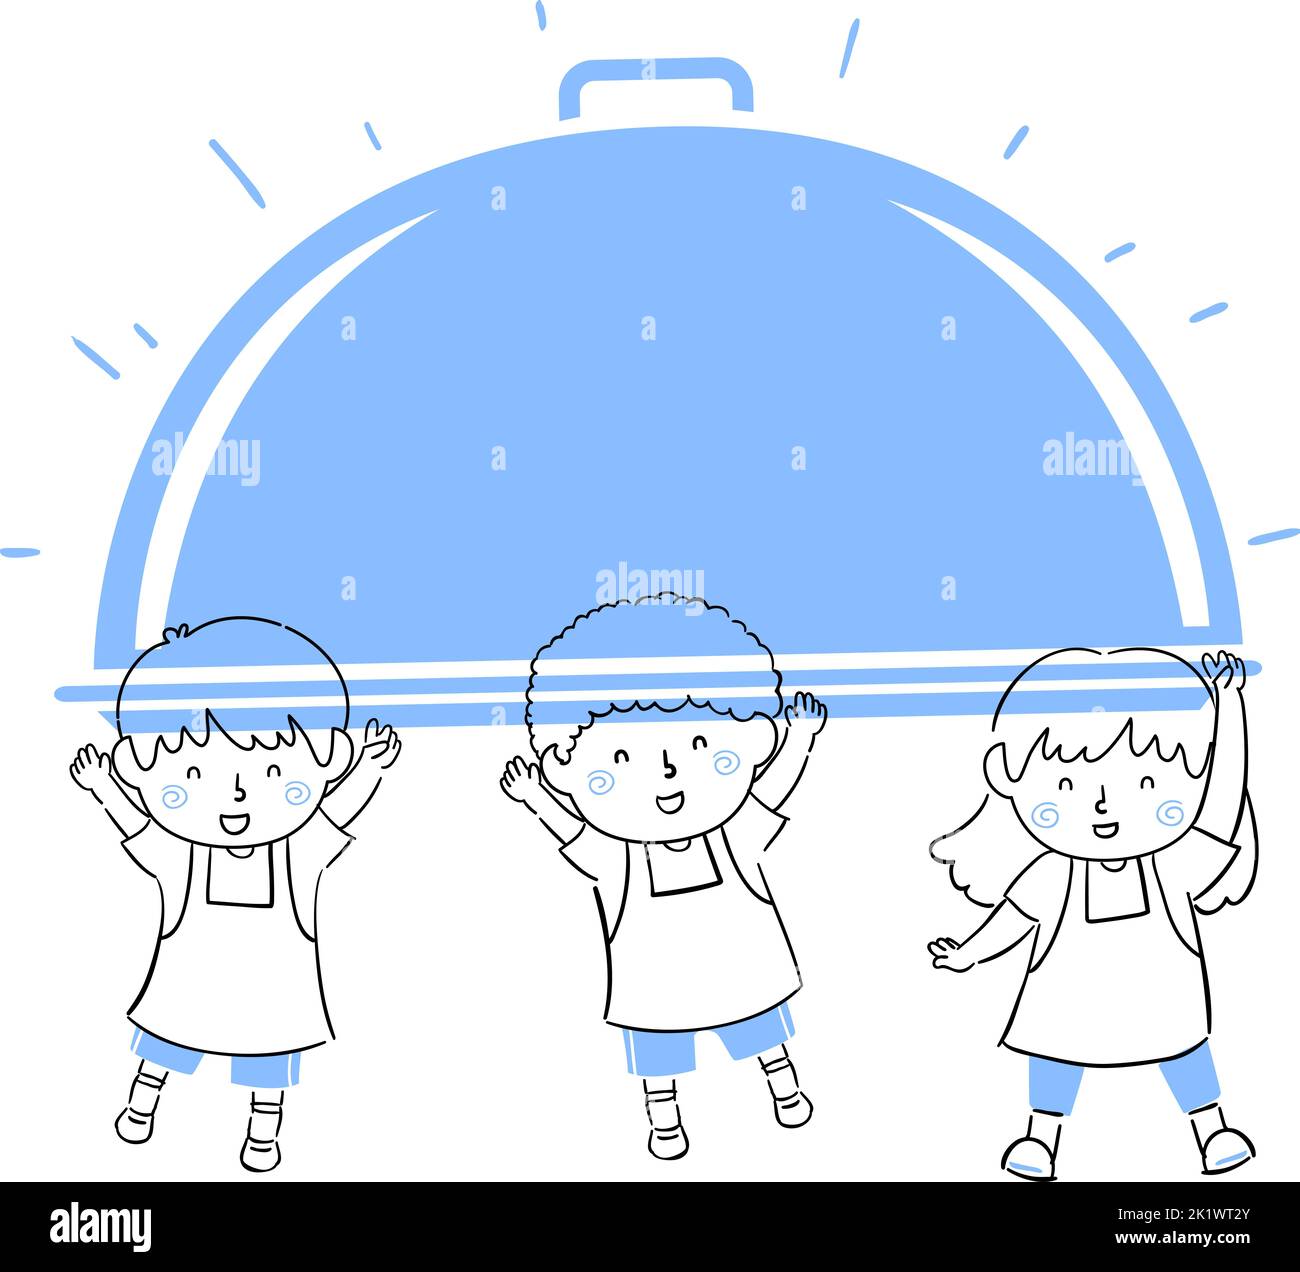 Doodle Illustration of Kids Wearing Apron and Holding a Big Blue Platter of Food They Cooked Stock Photo